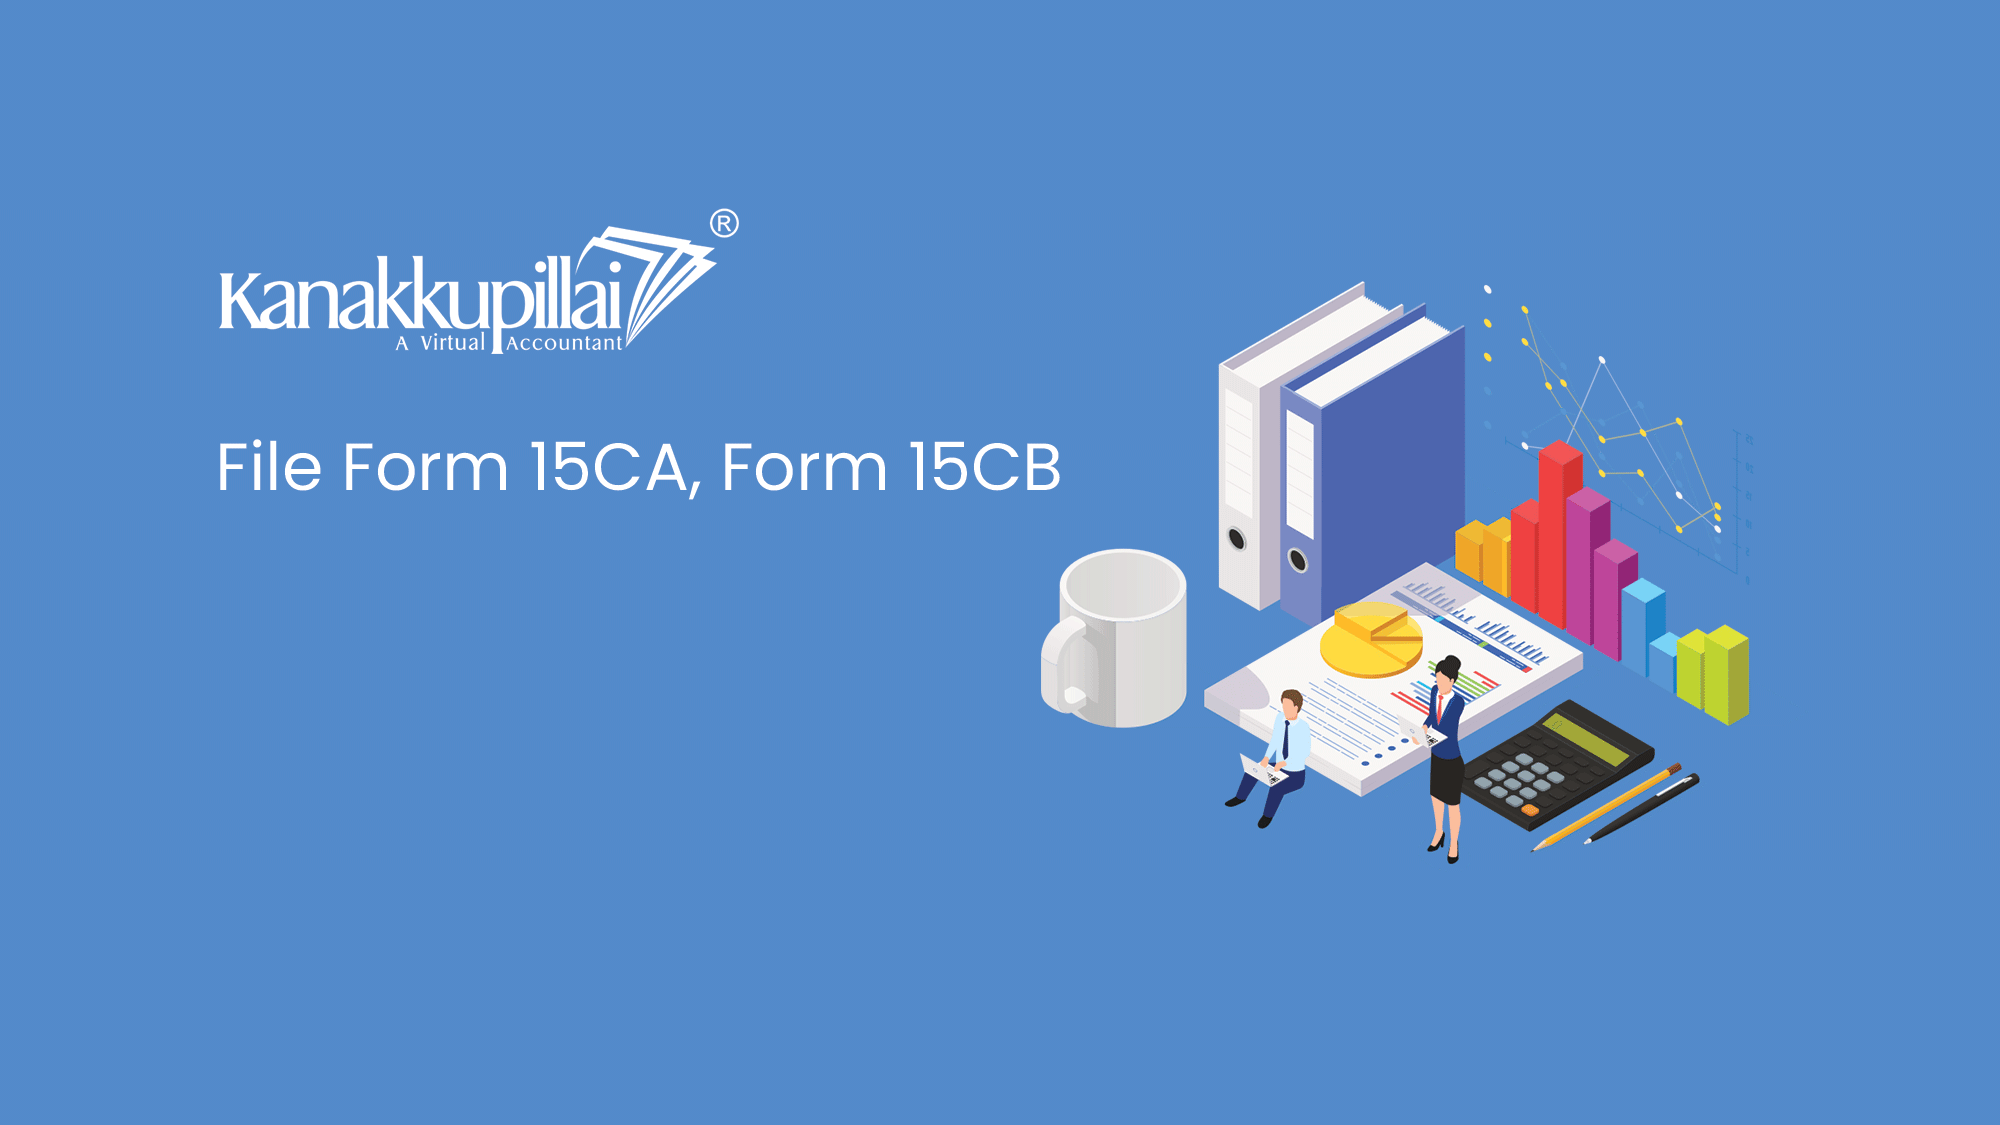 When To File Form 15CA, Form 15CB